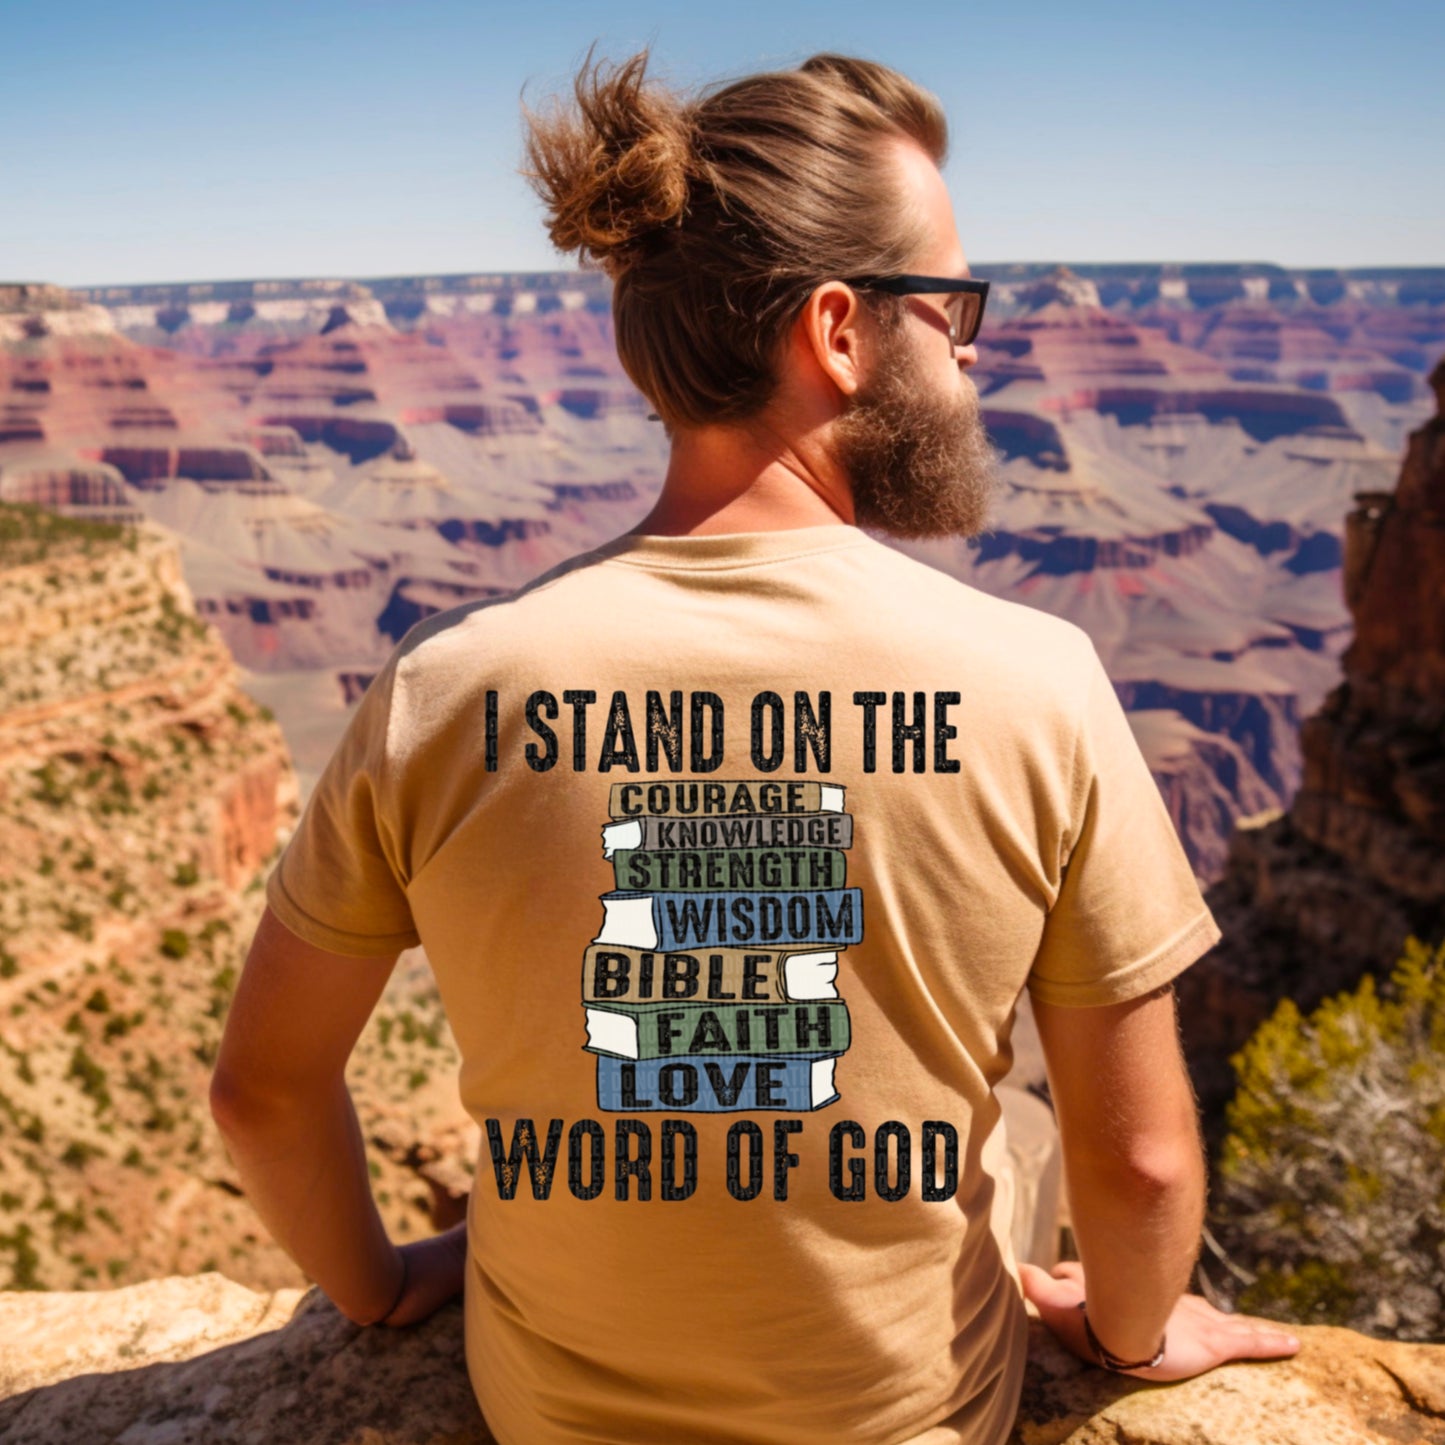 I stand on the word of God